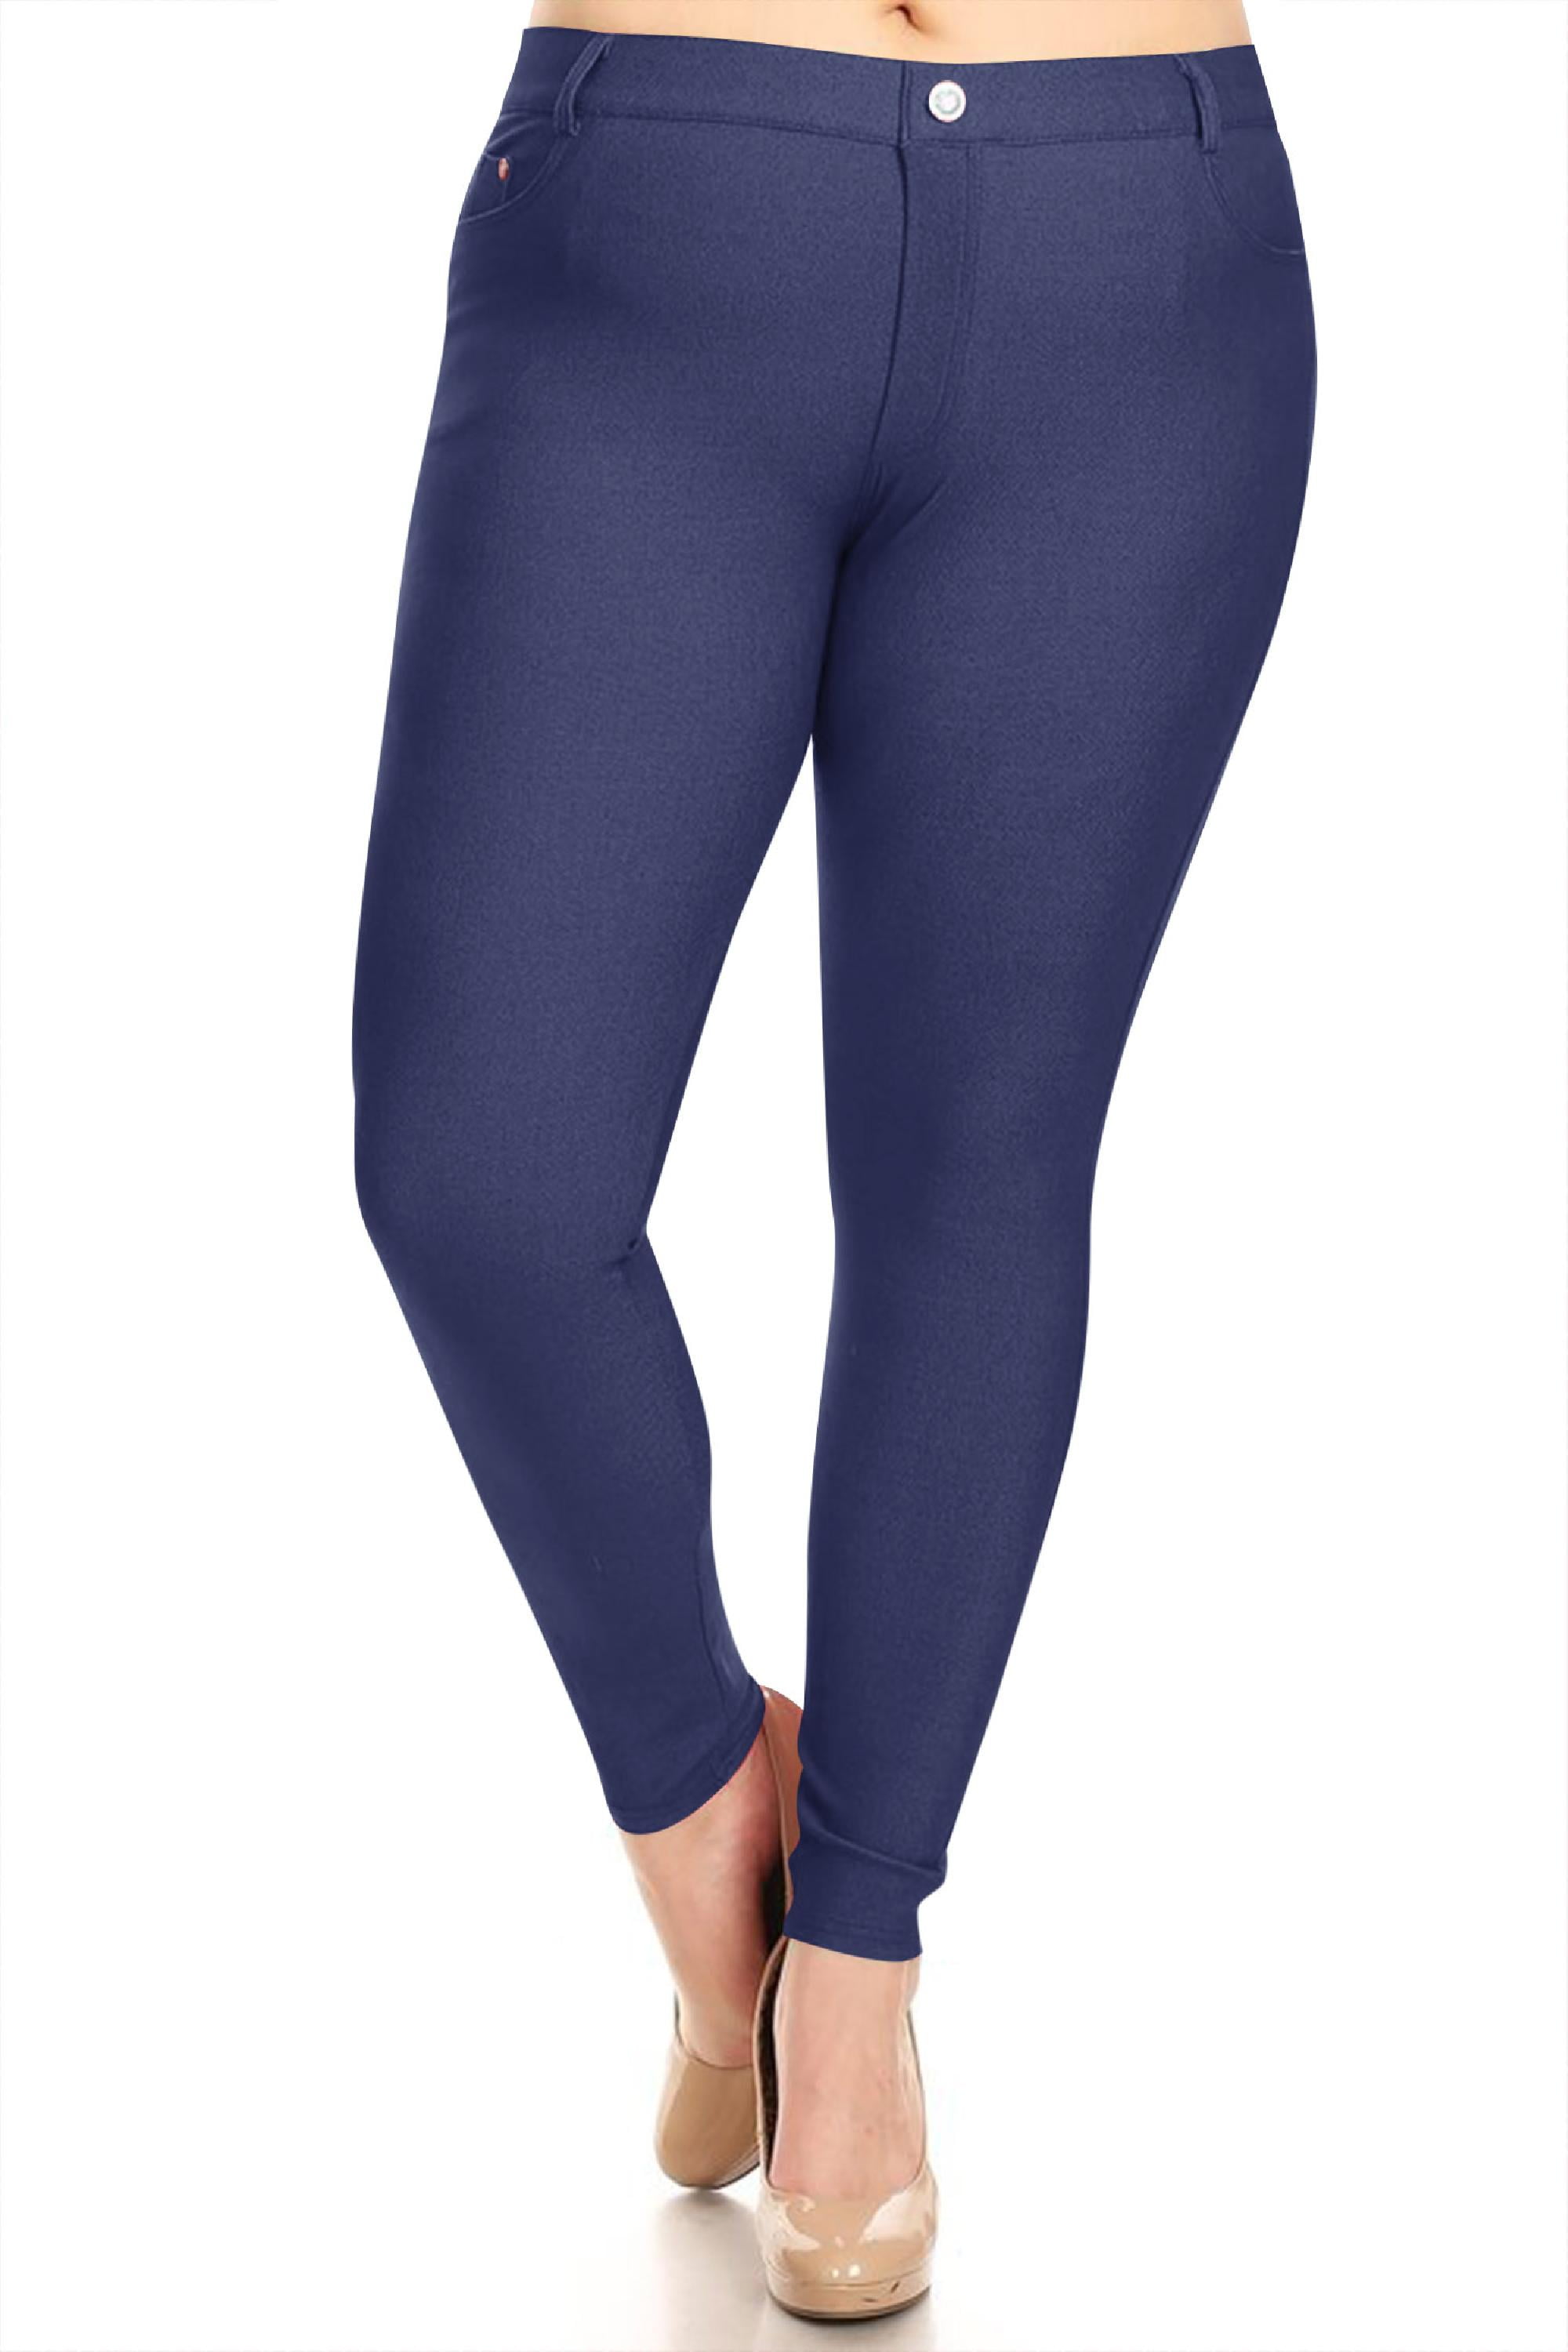 Women's Plus Size Skinny Stretch Solid Jeggings Pants with Pockets ...